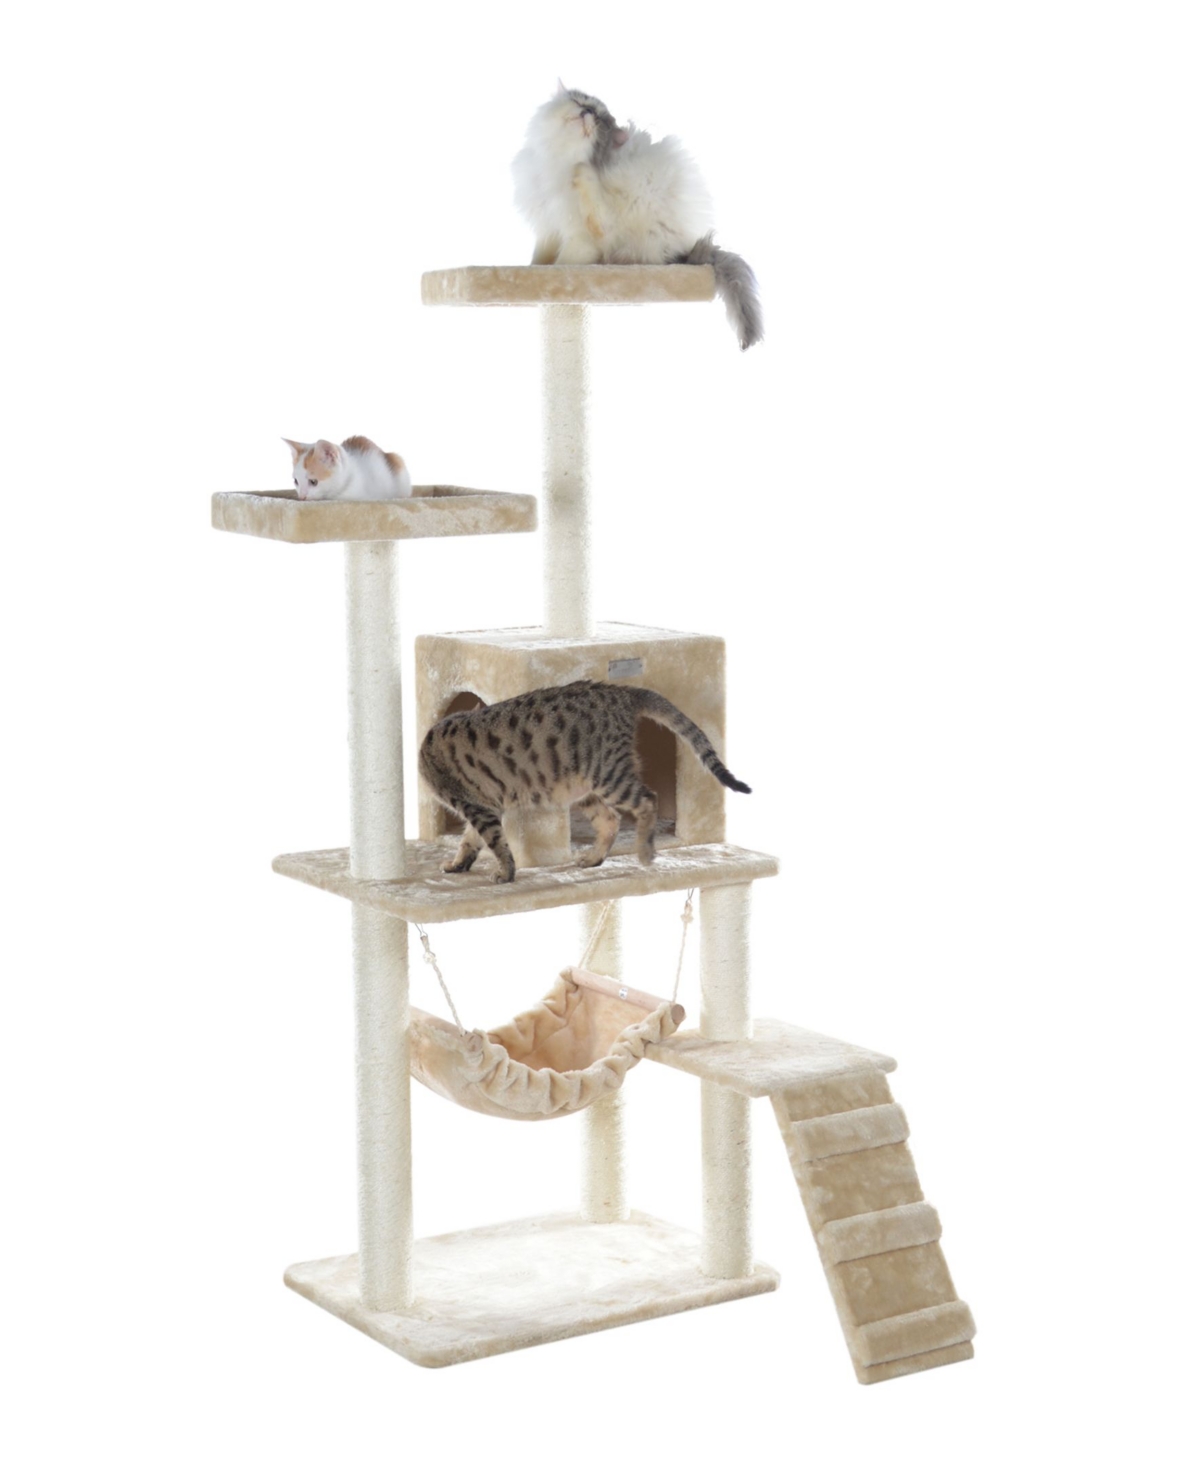 57-Inch Real Wood Cat Tree With Perches, Ramp, Condo & Hammock - Beige